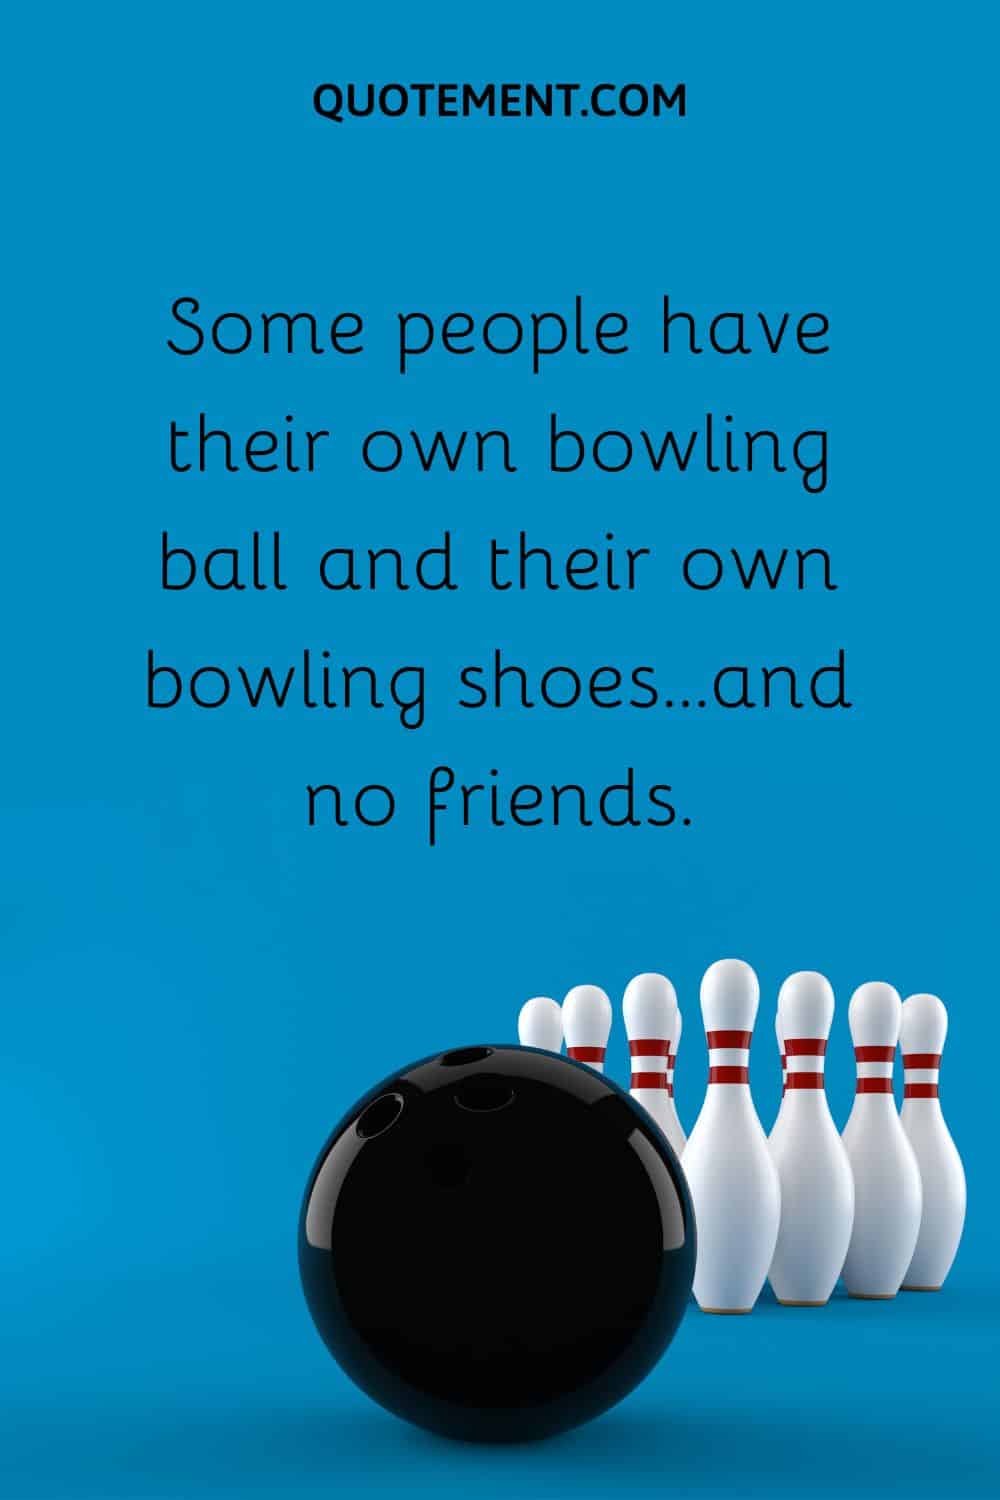 Some people have their own bowling ball and their own bowling shoes…and no friends